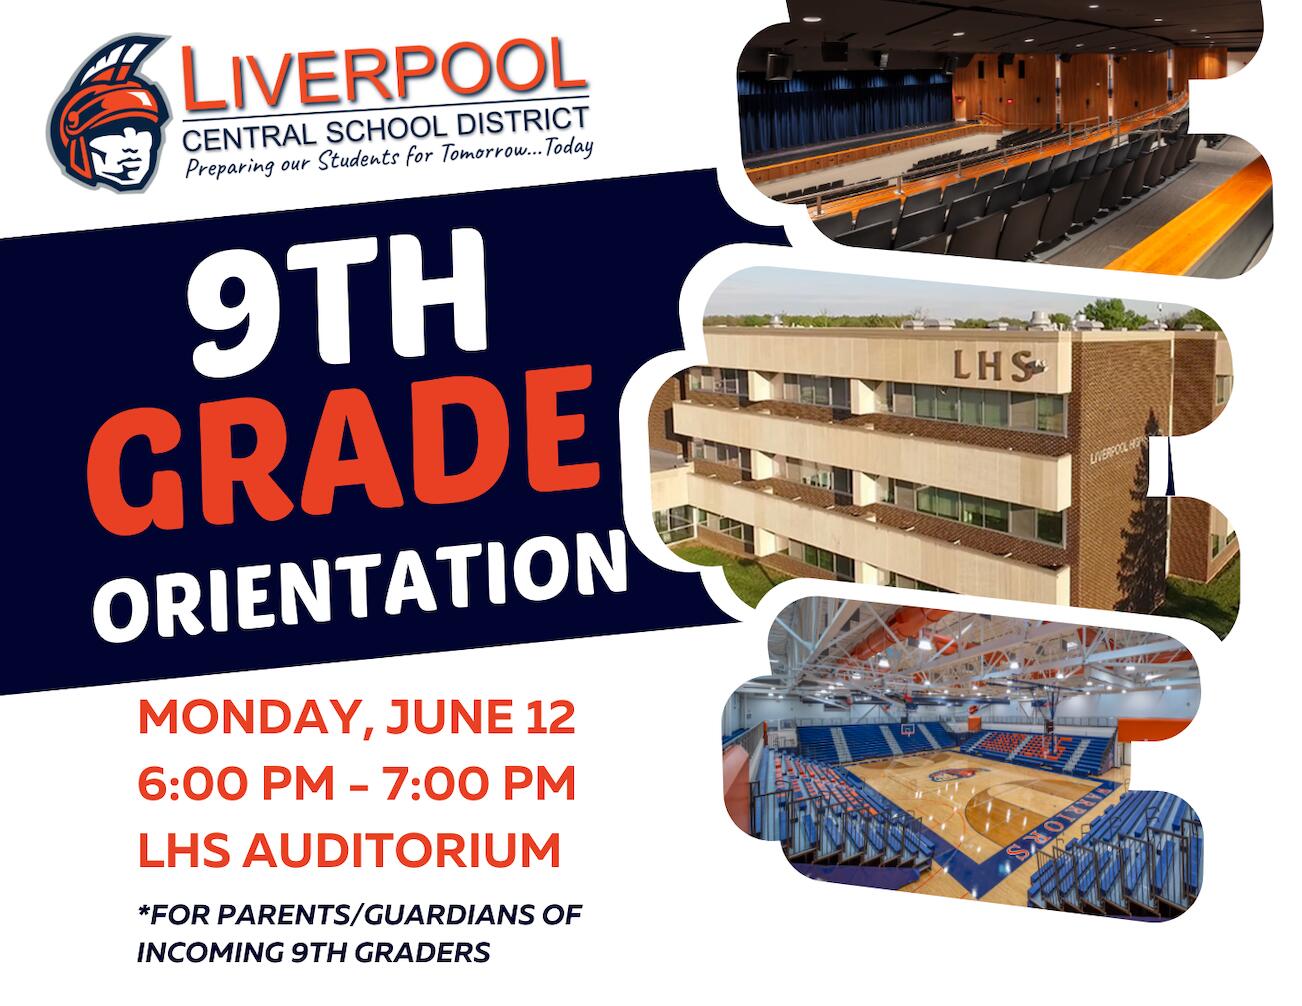 Ninth grade orientation, June 12 from 6 to 7 pm at LHS auditorium